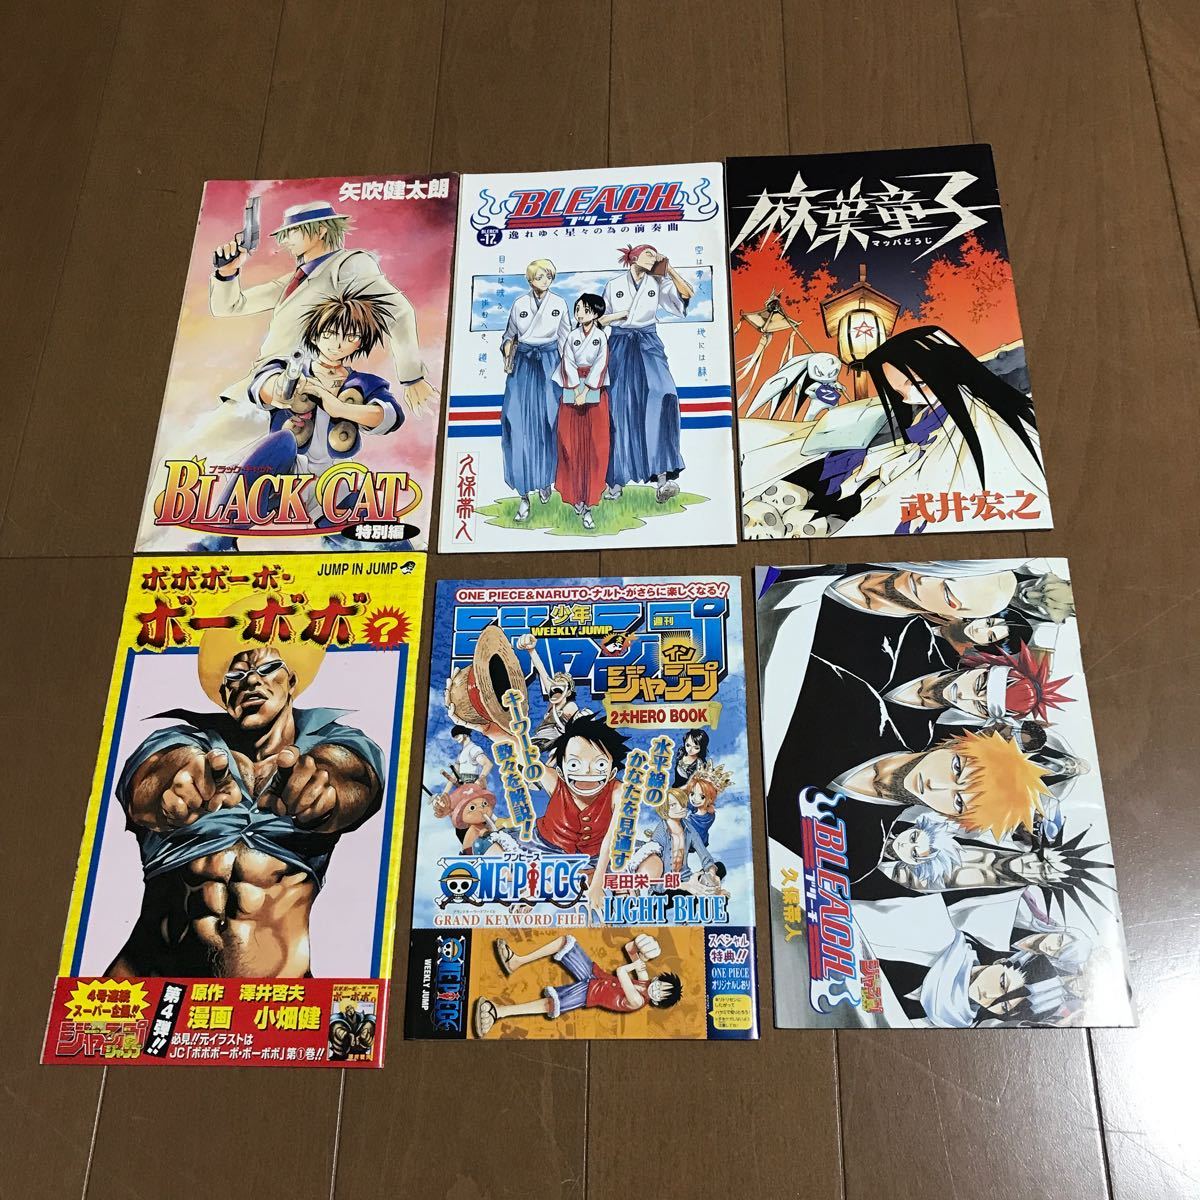  Jump in Jump 6 pcs. together that time thing [ flax leaf ..,bobobo-bo*bo-bobo, bleach other ]* magazine scraps weekly Shonen Jump 